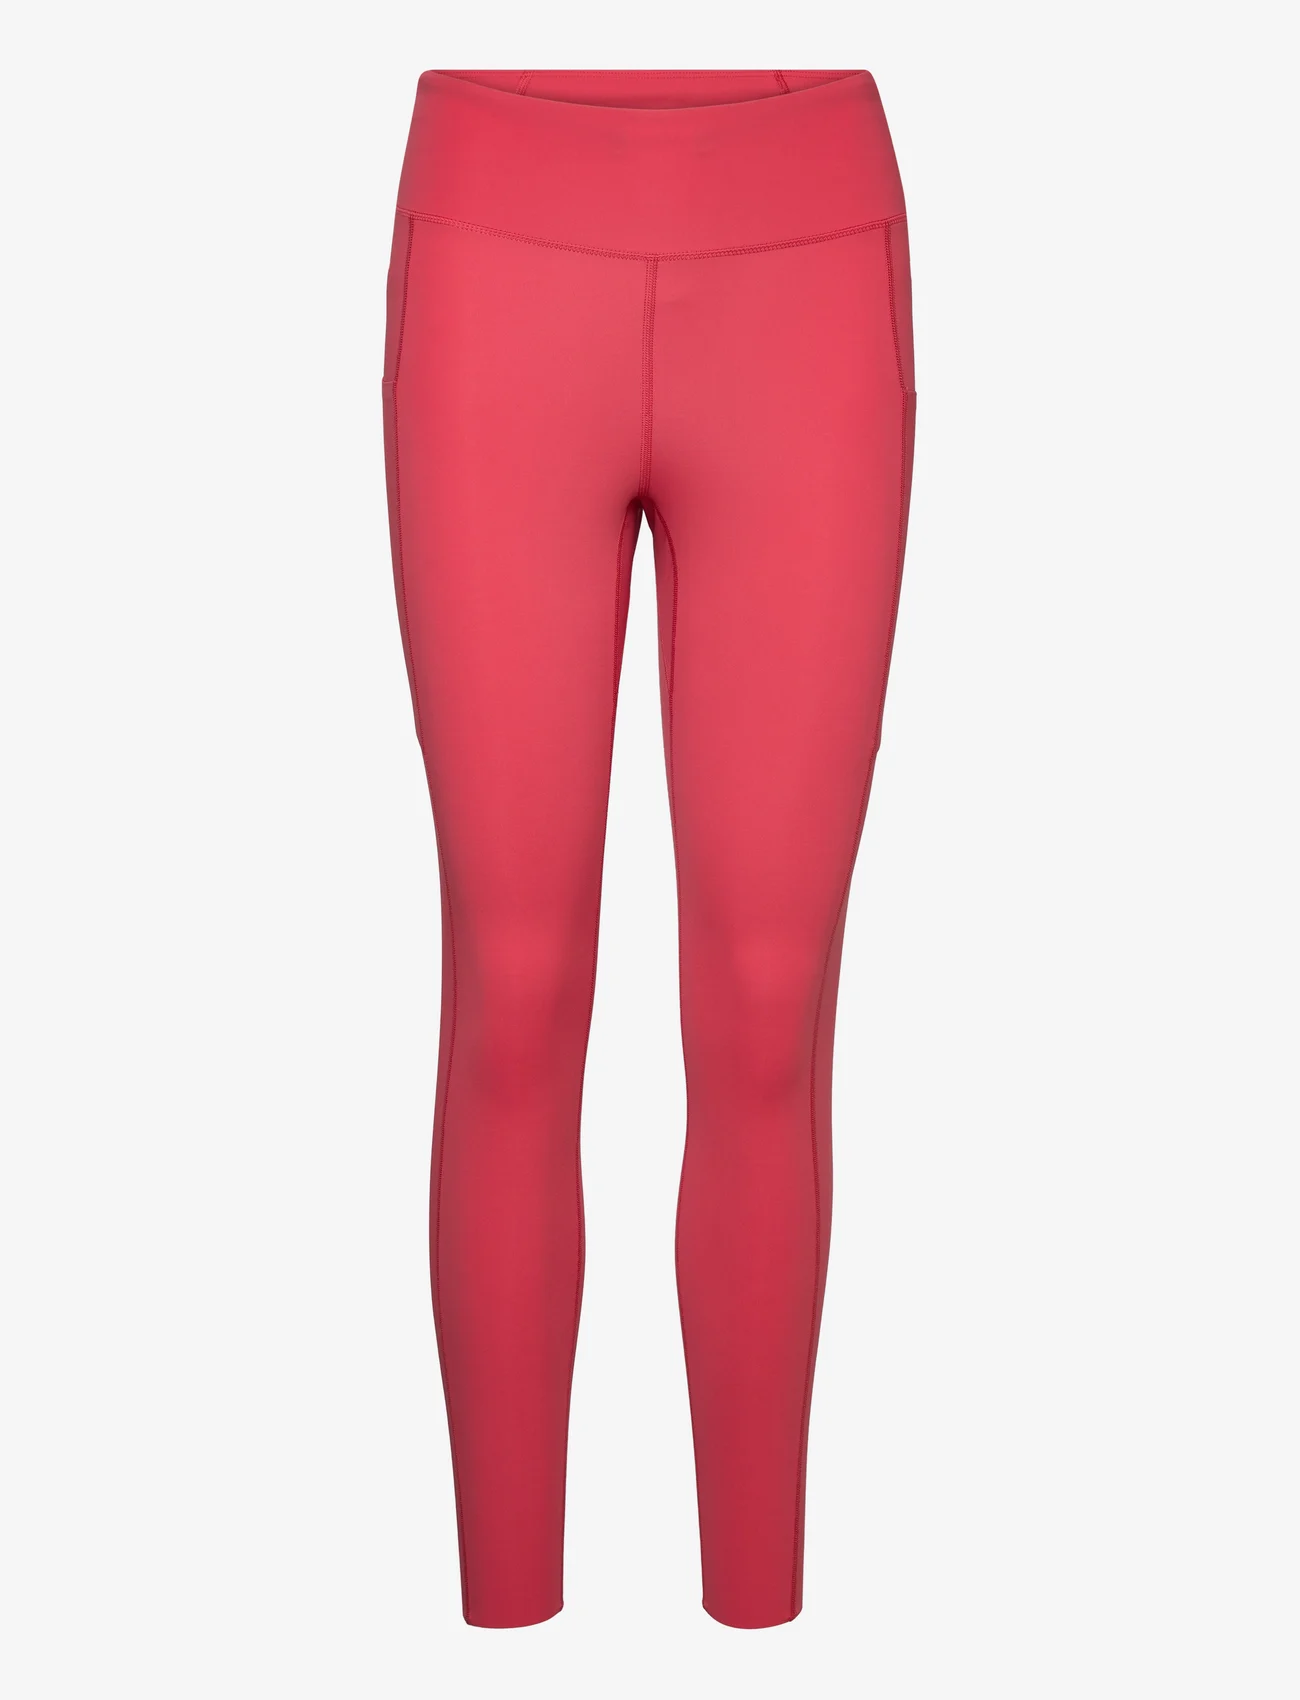 Peak Performance - W Power Tights-SOFTER RED - sportleggings - softer red - 0